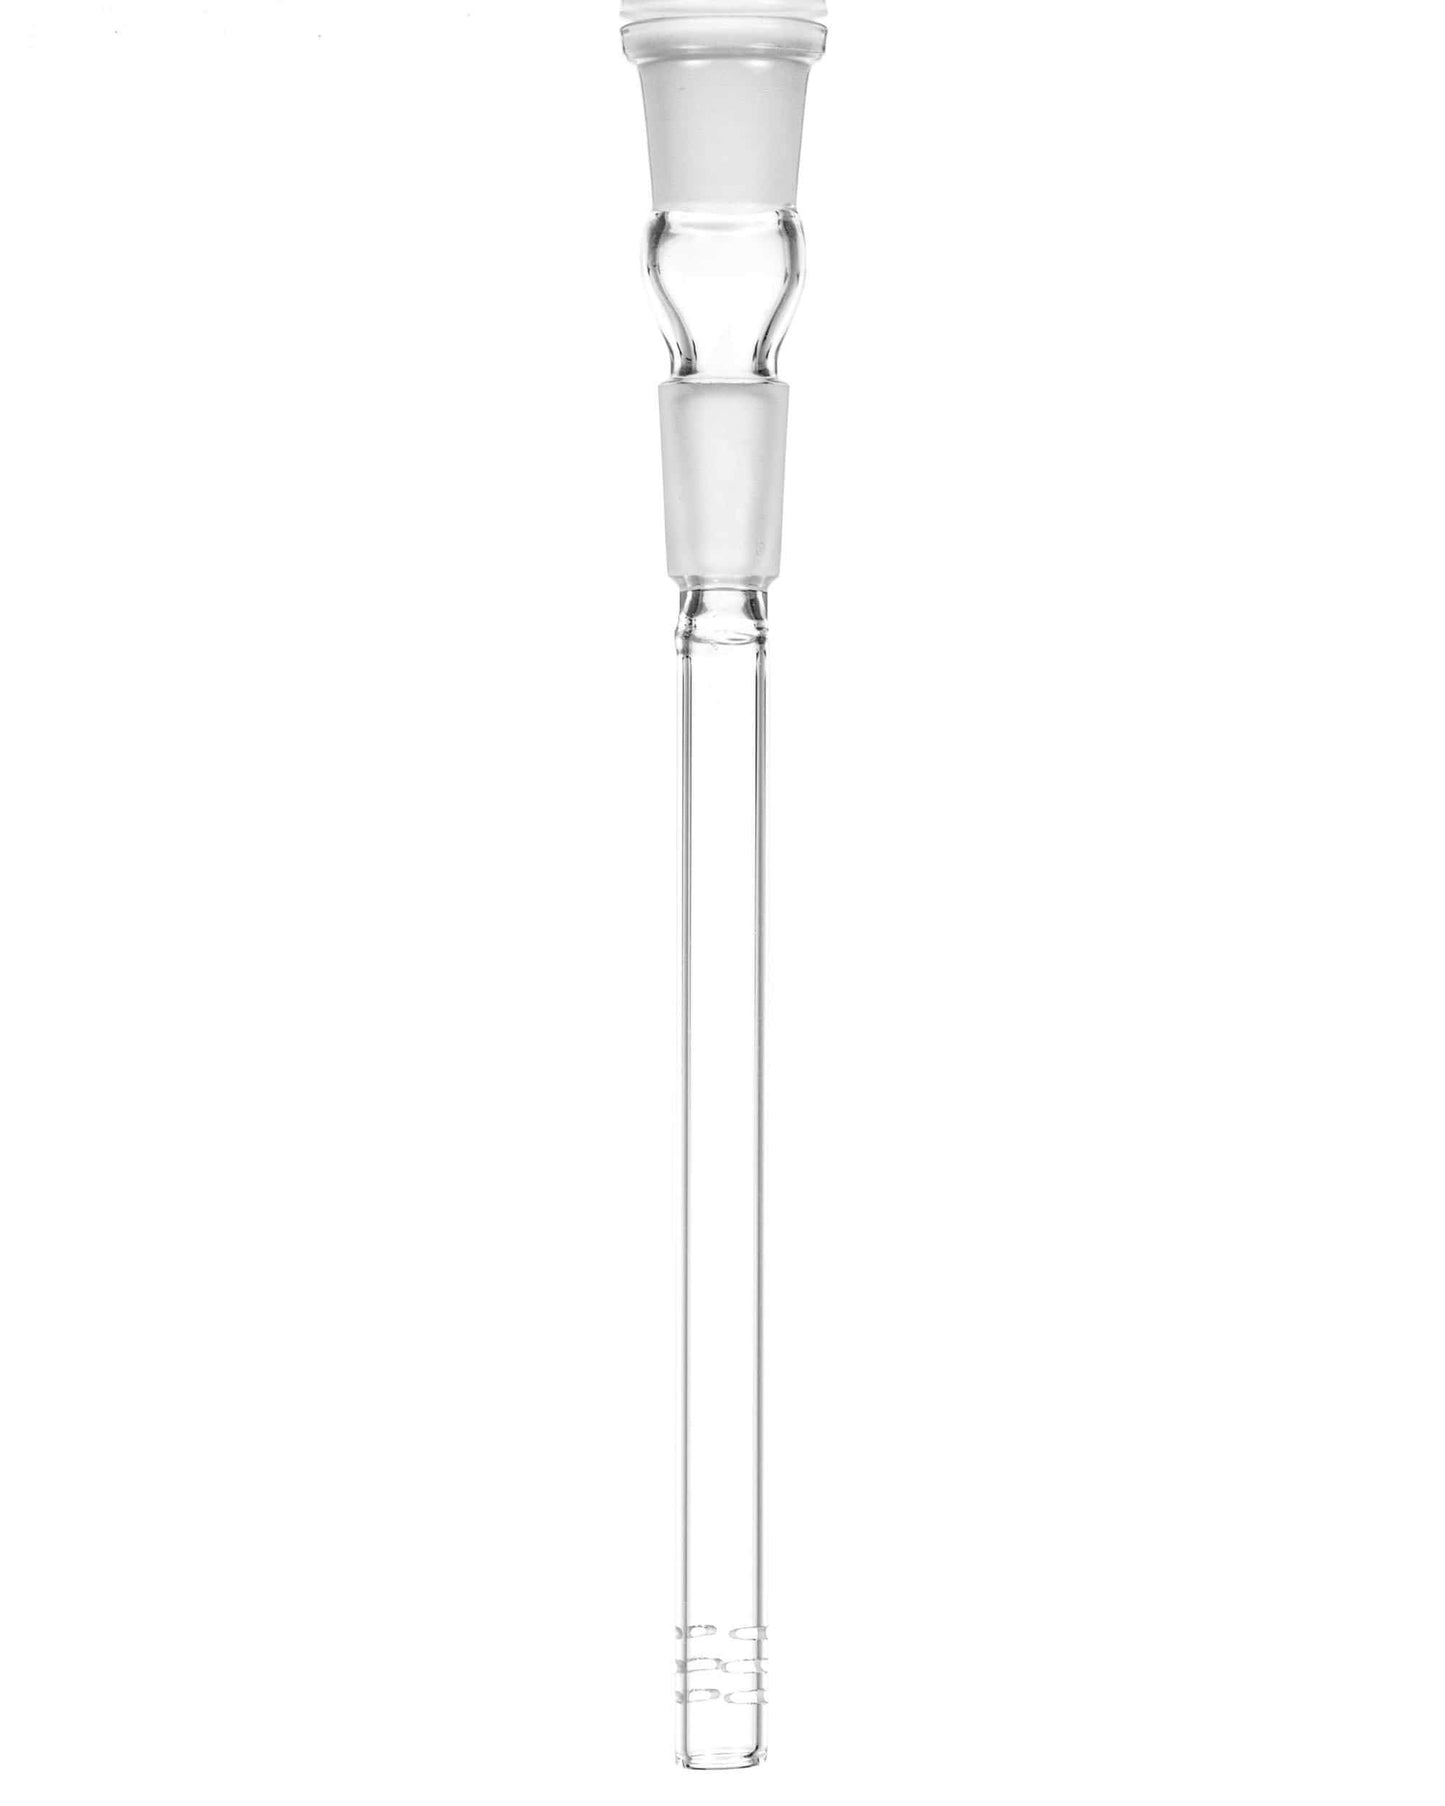 Daily High Club Downstem 14mm to 14mm Diffused Downstem